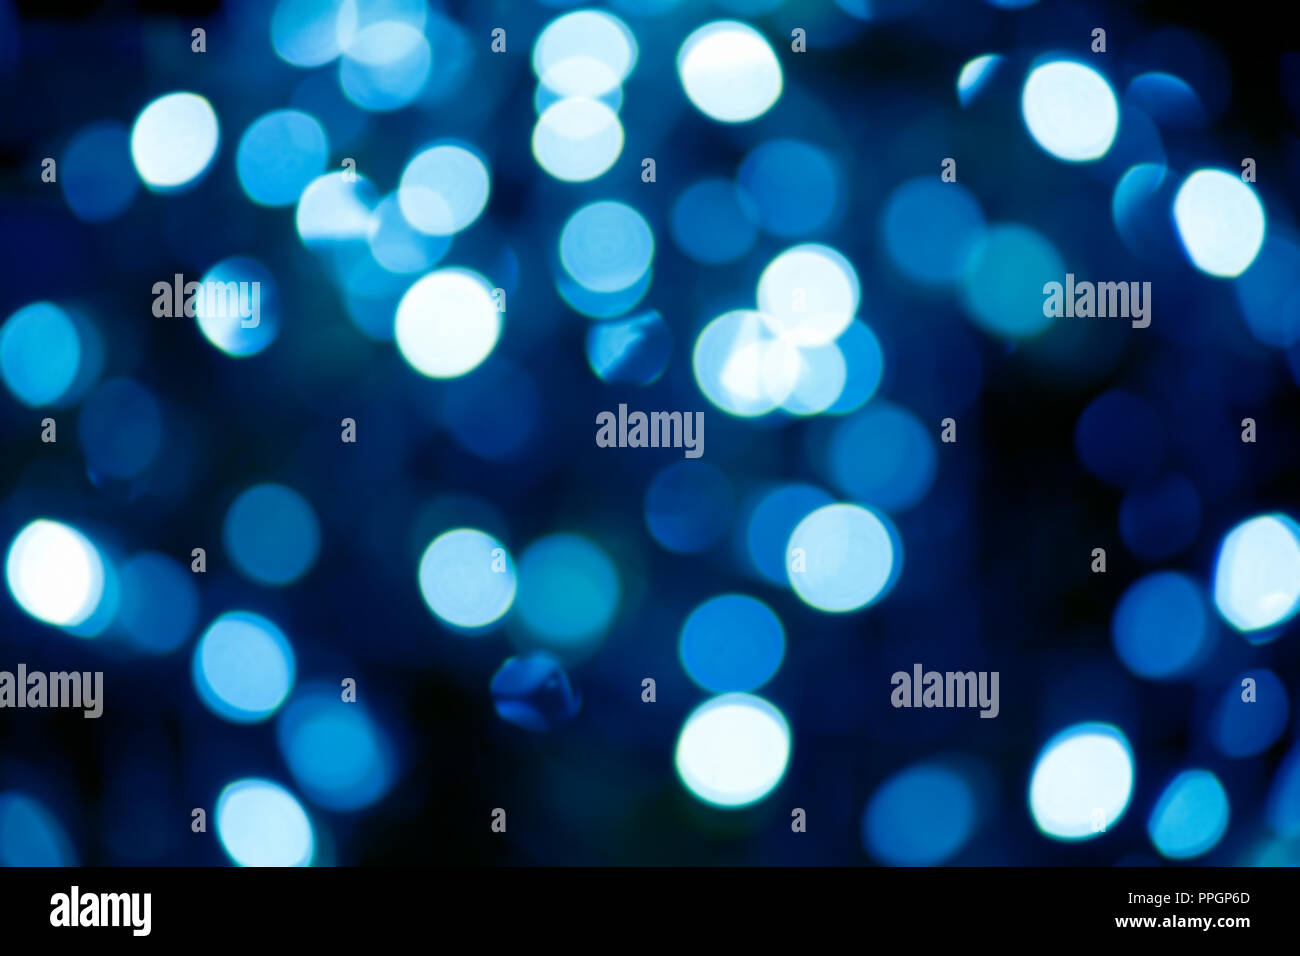 Blurry background image of defocused blue abstract city street lights at night Stock Photo